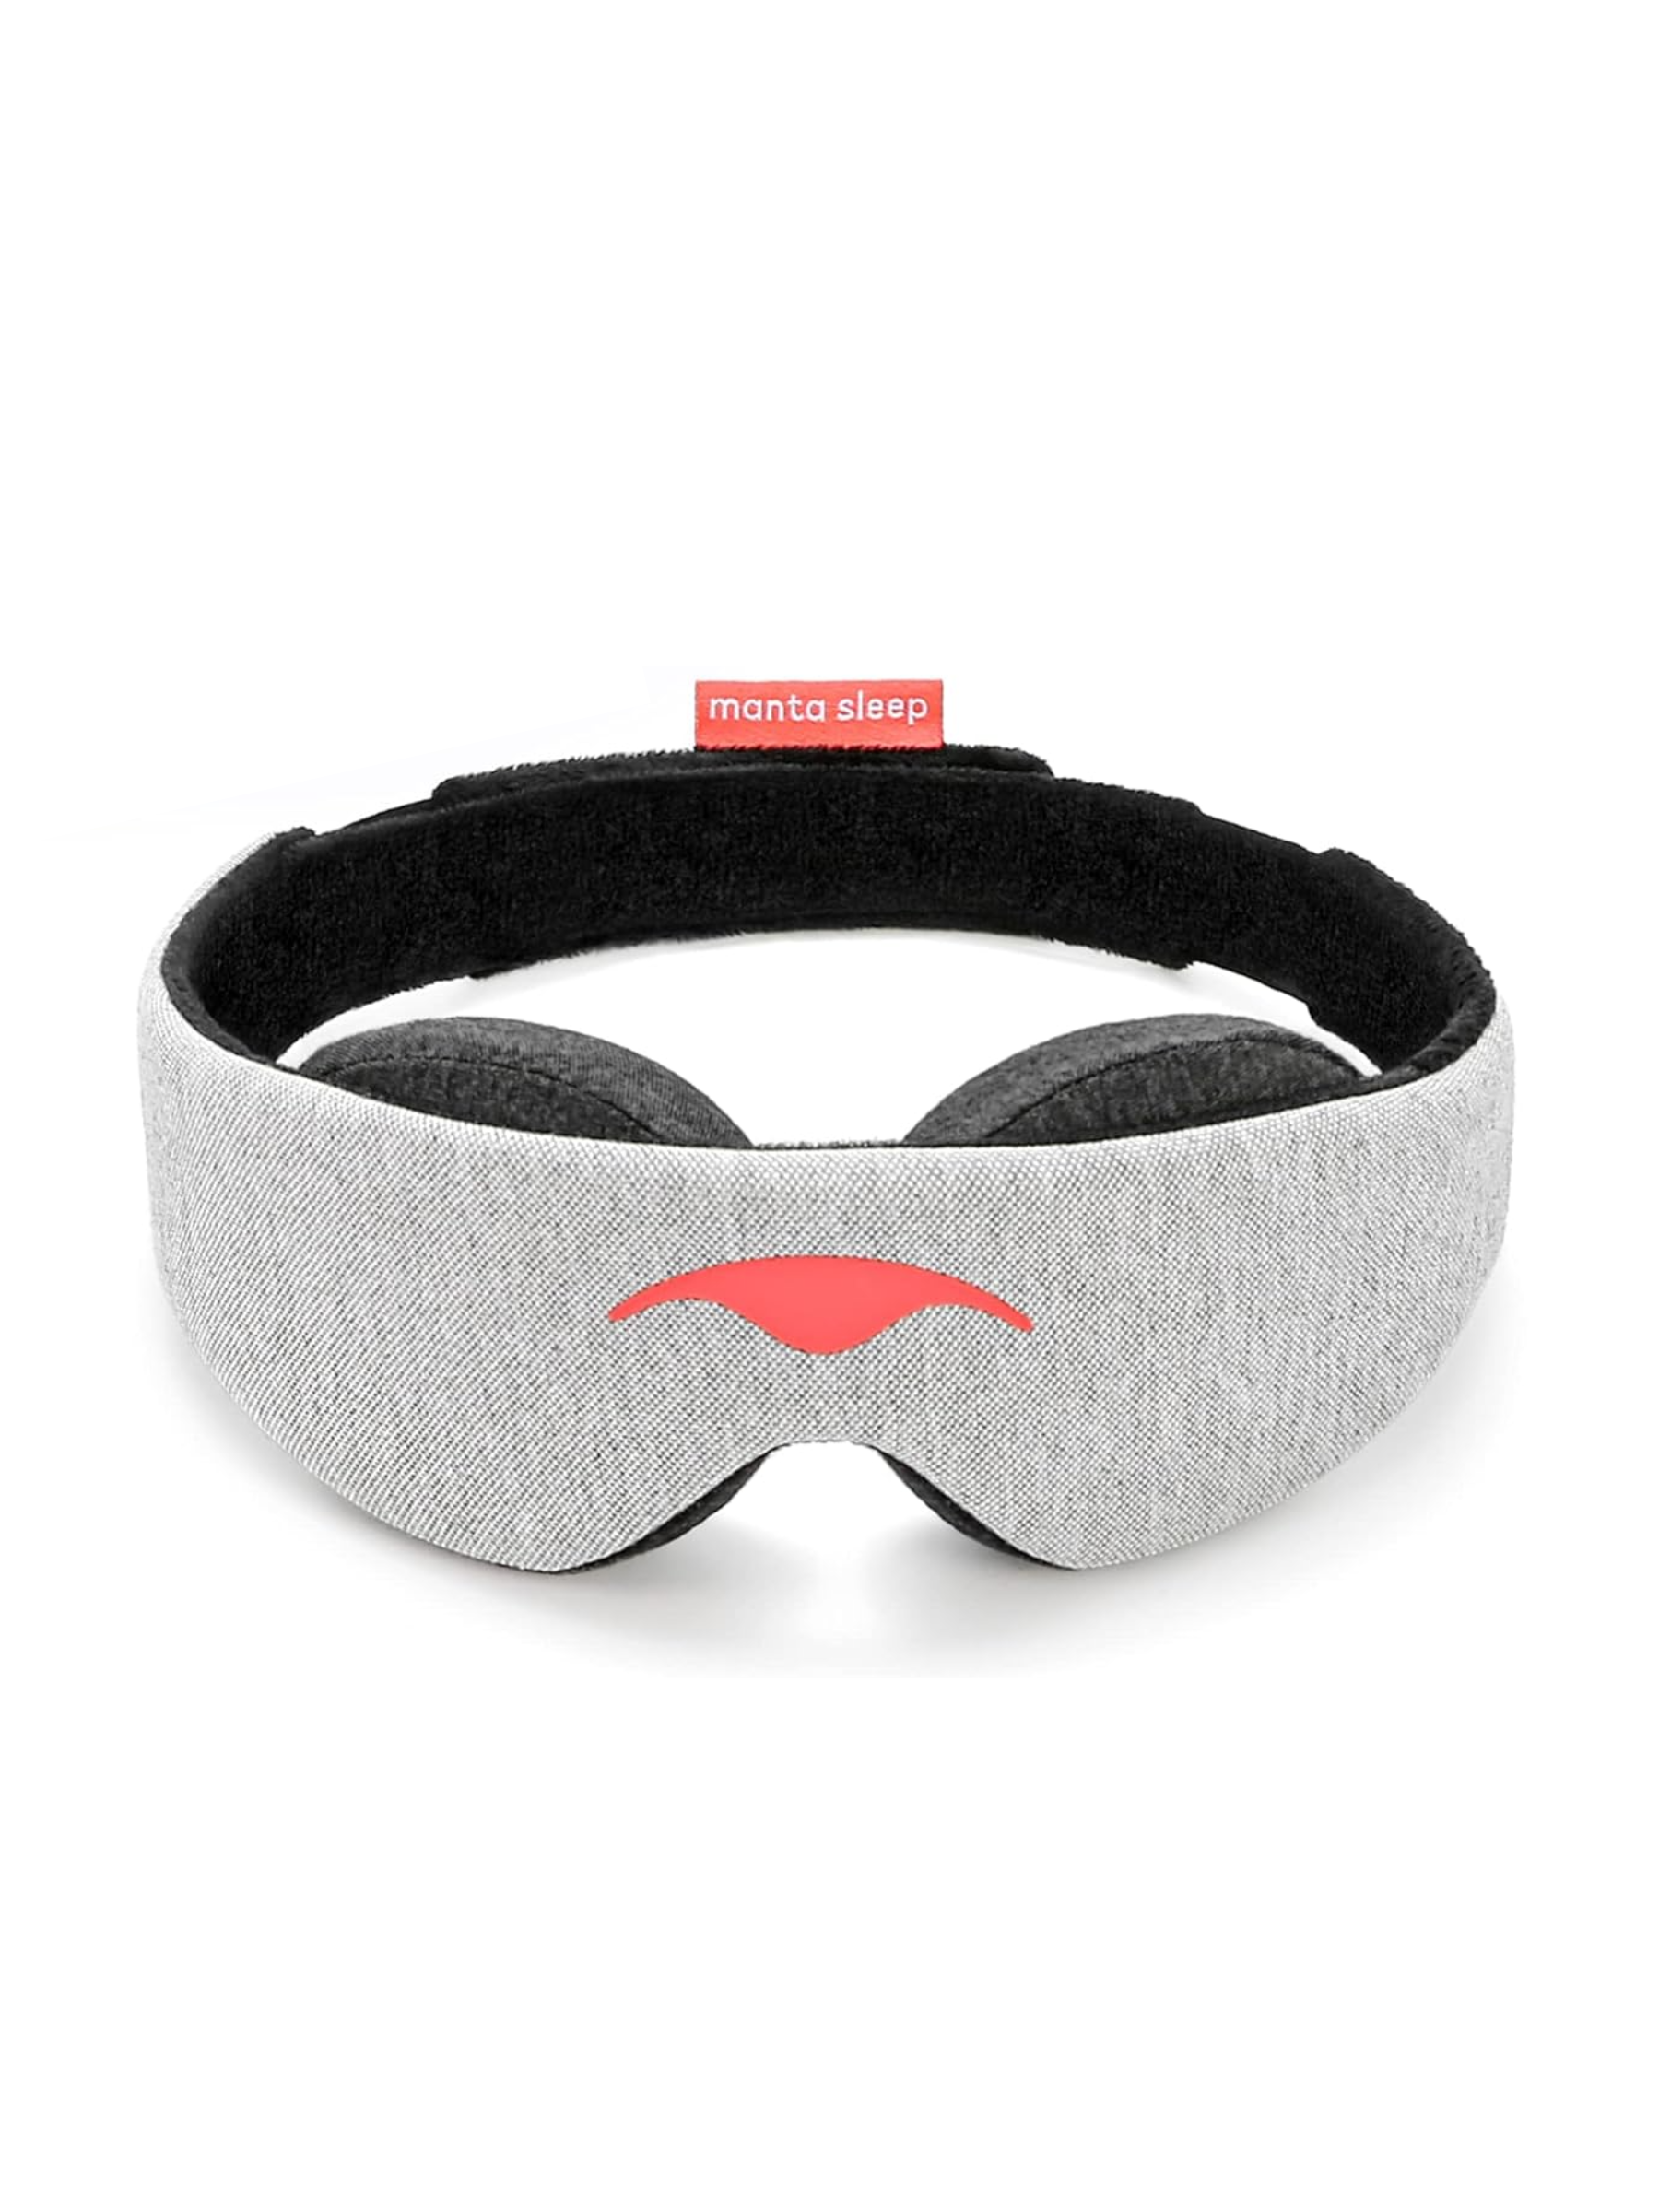 Help your young adult develop good sleep habits with a light-blocking mask that has hollow eye cups to ease pressure or to keep lash extensions intact. $35, Amazon. <a href="https://www.amazon.com/dp/B07PRG2CQY?">Get it now!</a><p>Sign up for today’s biggest stories, from pop culture to politics.</p><a href="https://www.glamour.com/newsletter/news?sourceCode=msnsend">Sign Up</a>